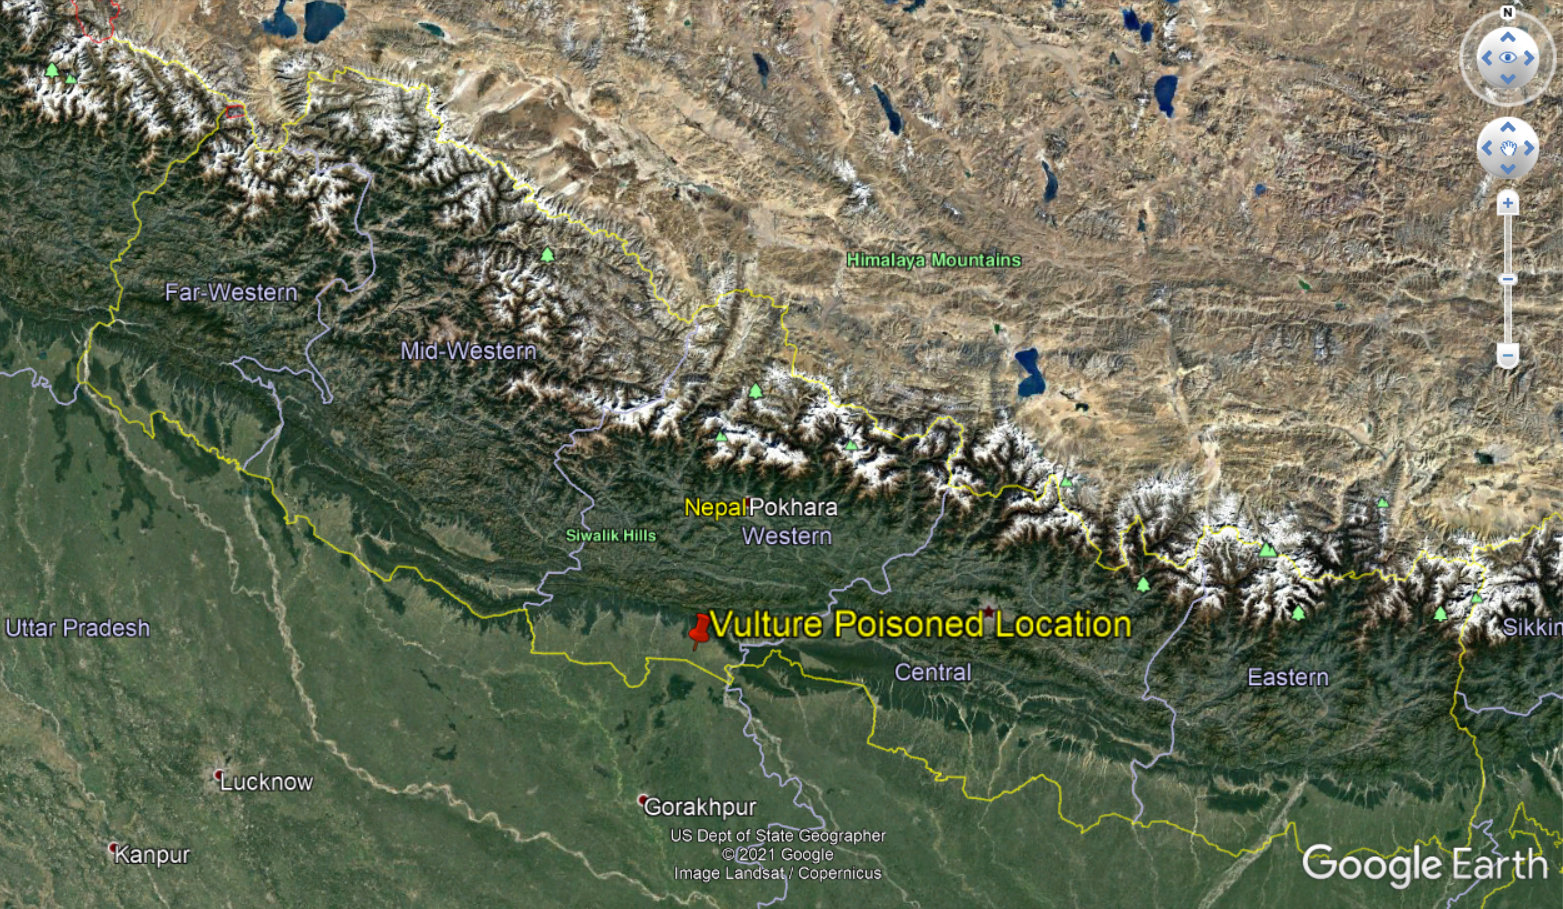 A Google Earth map shows where in Nepal the vulture poisoning occurred